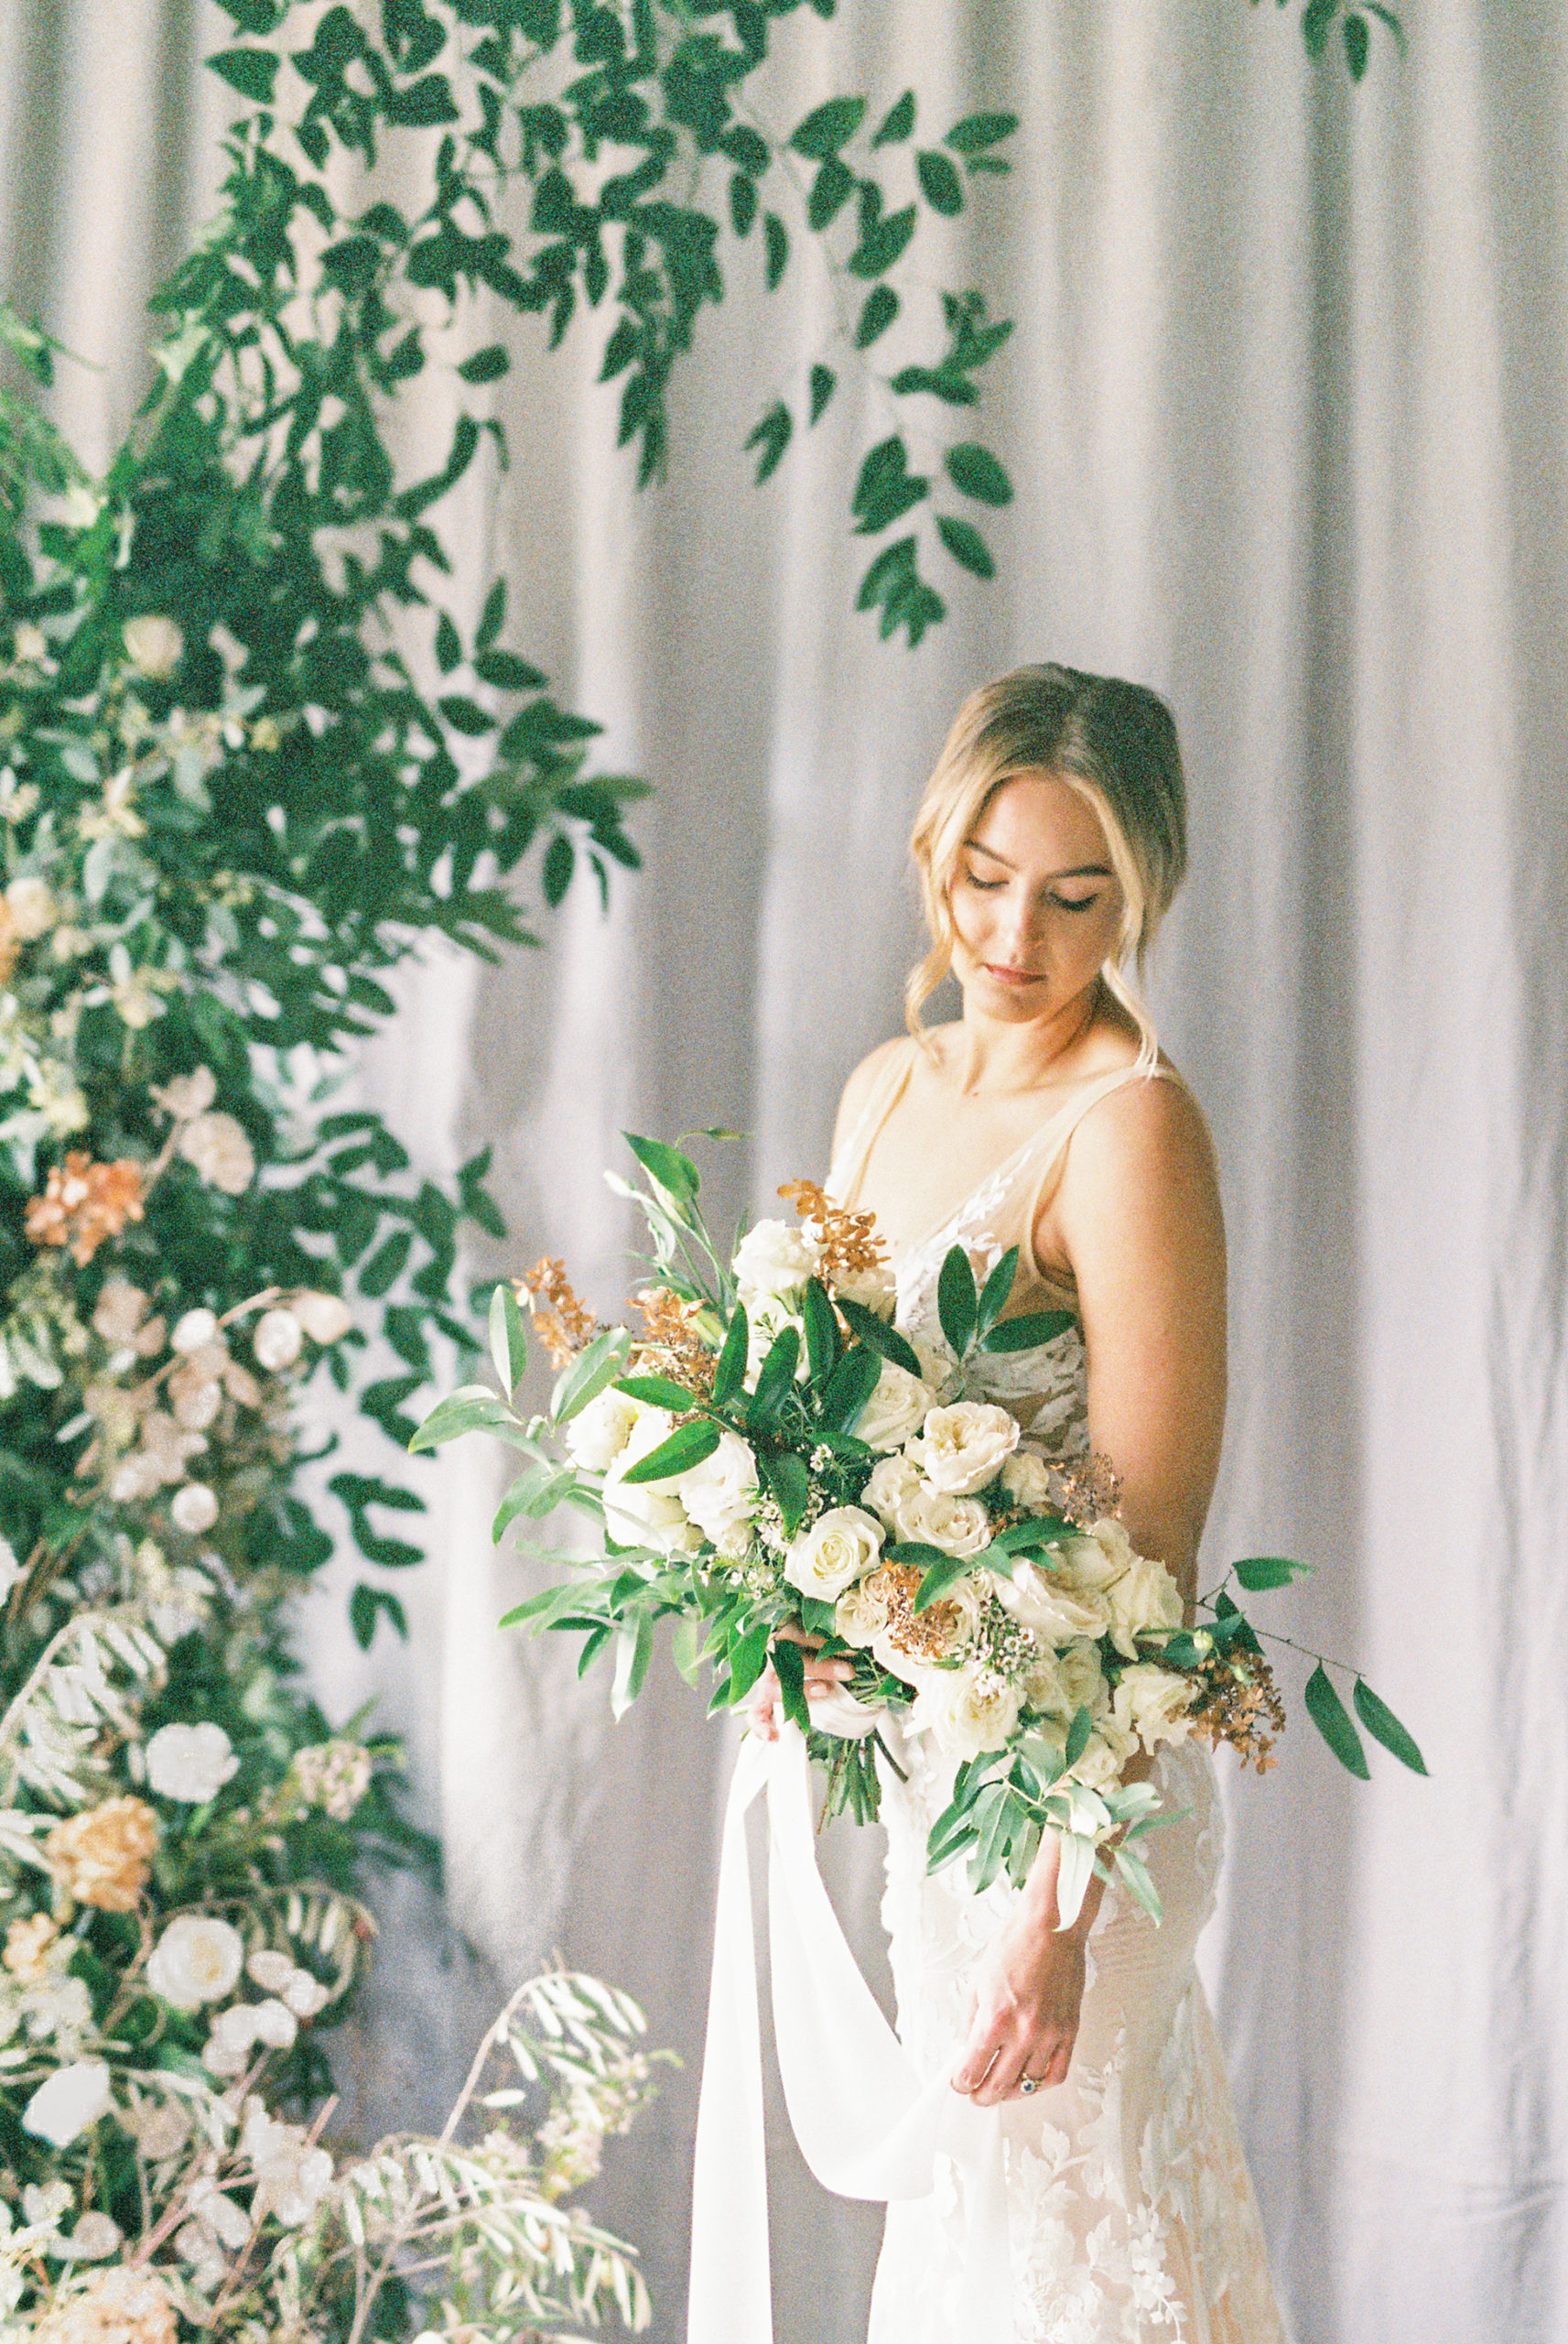 Bespoke Bridals at the Norman Farm and Antique Details by Something Minted